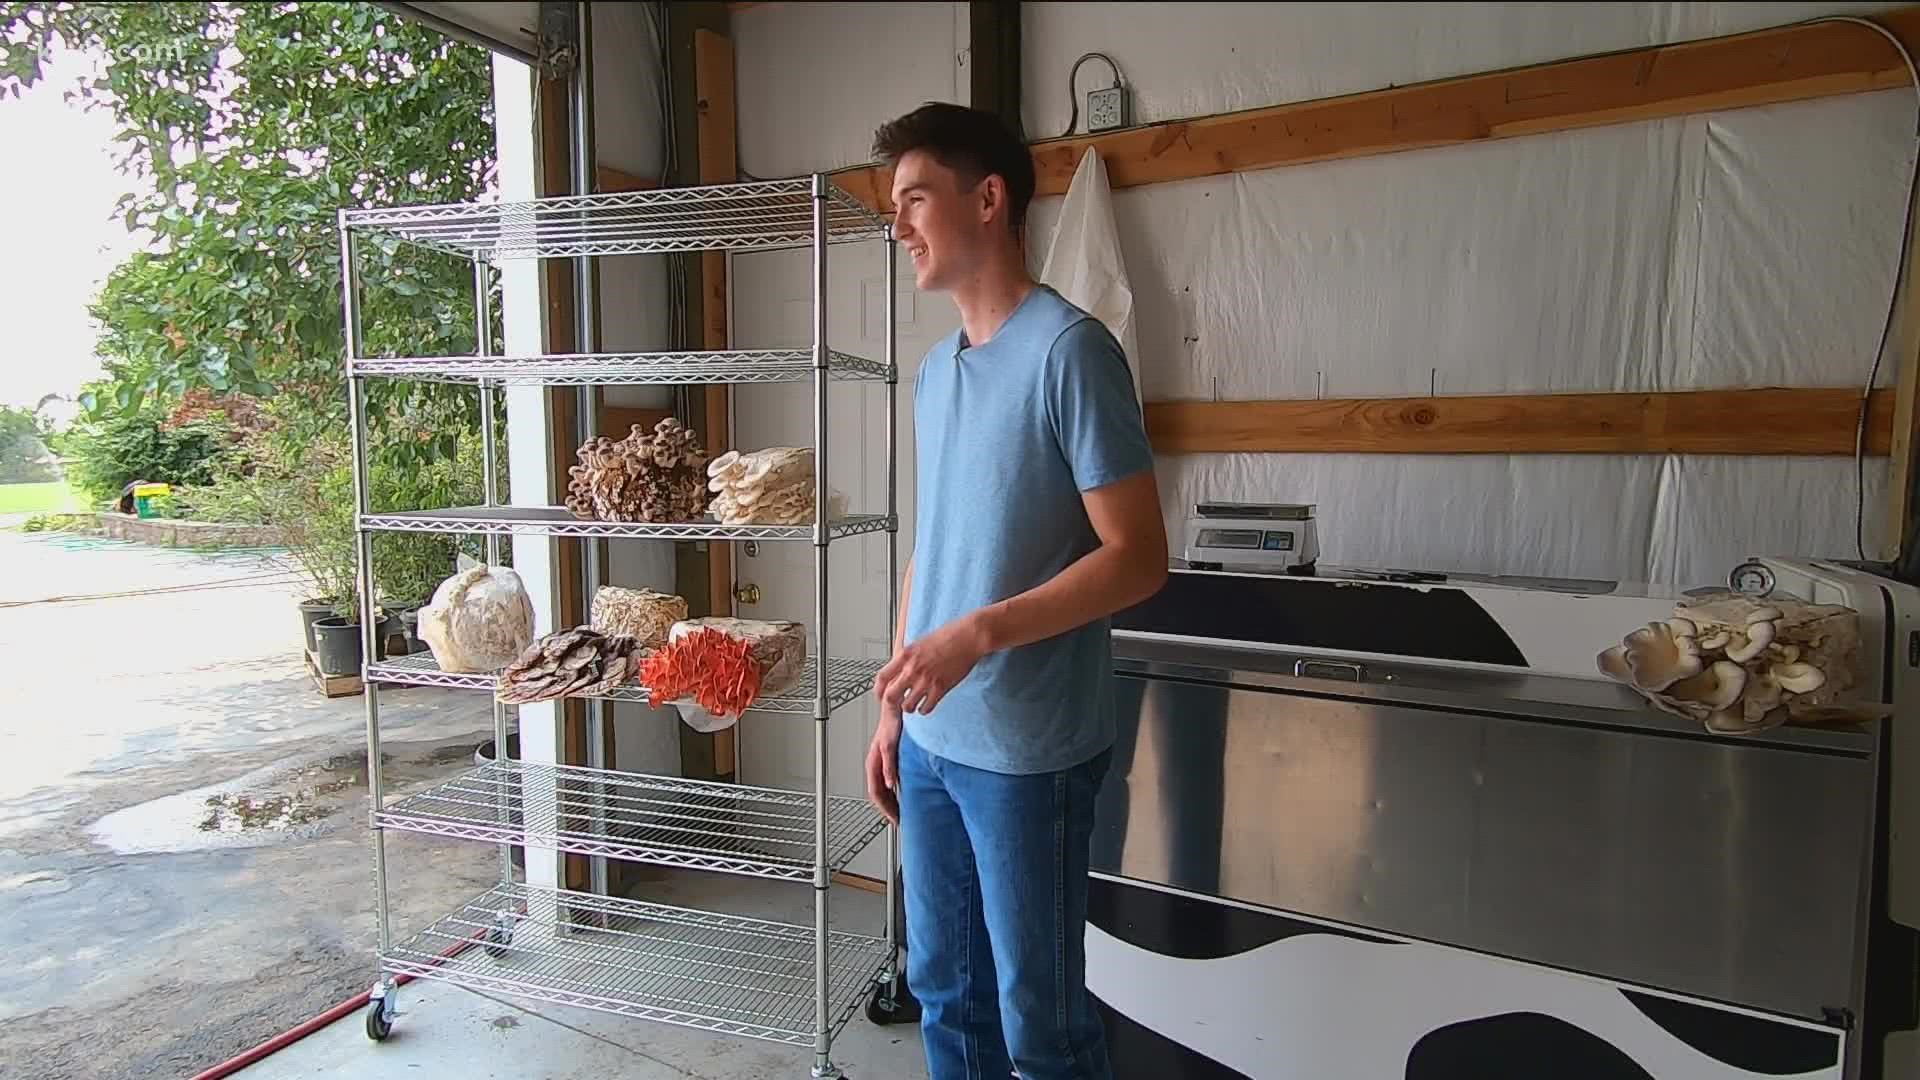 19-year-old Brody Ferguson started his own company, 'Ferg's Fabulous Fungi,' and he's developed a simple kit for growing edible mushrooms.